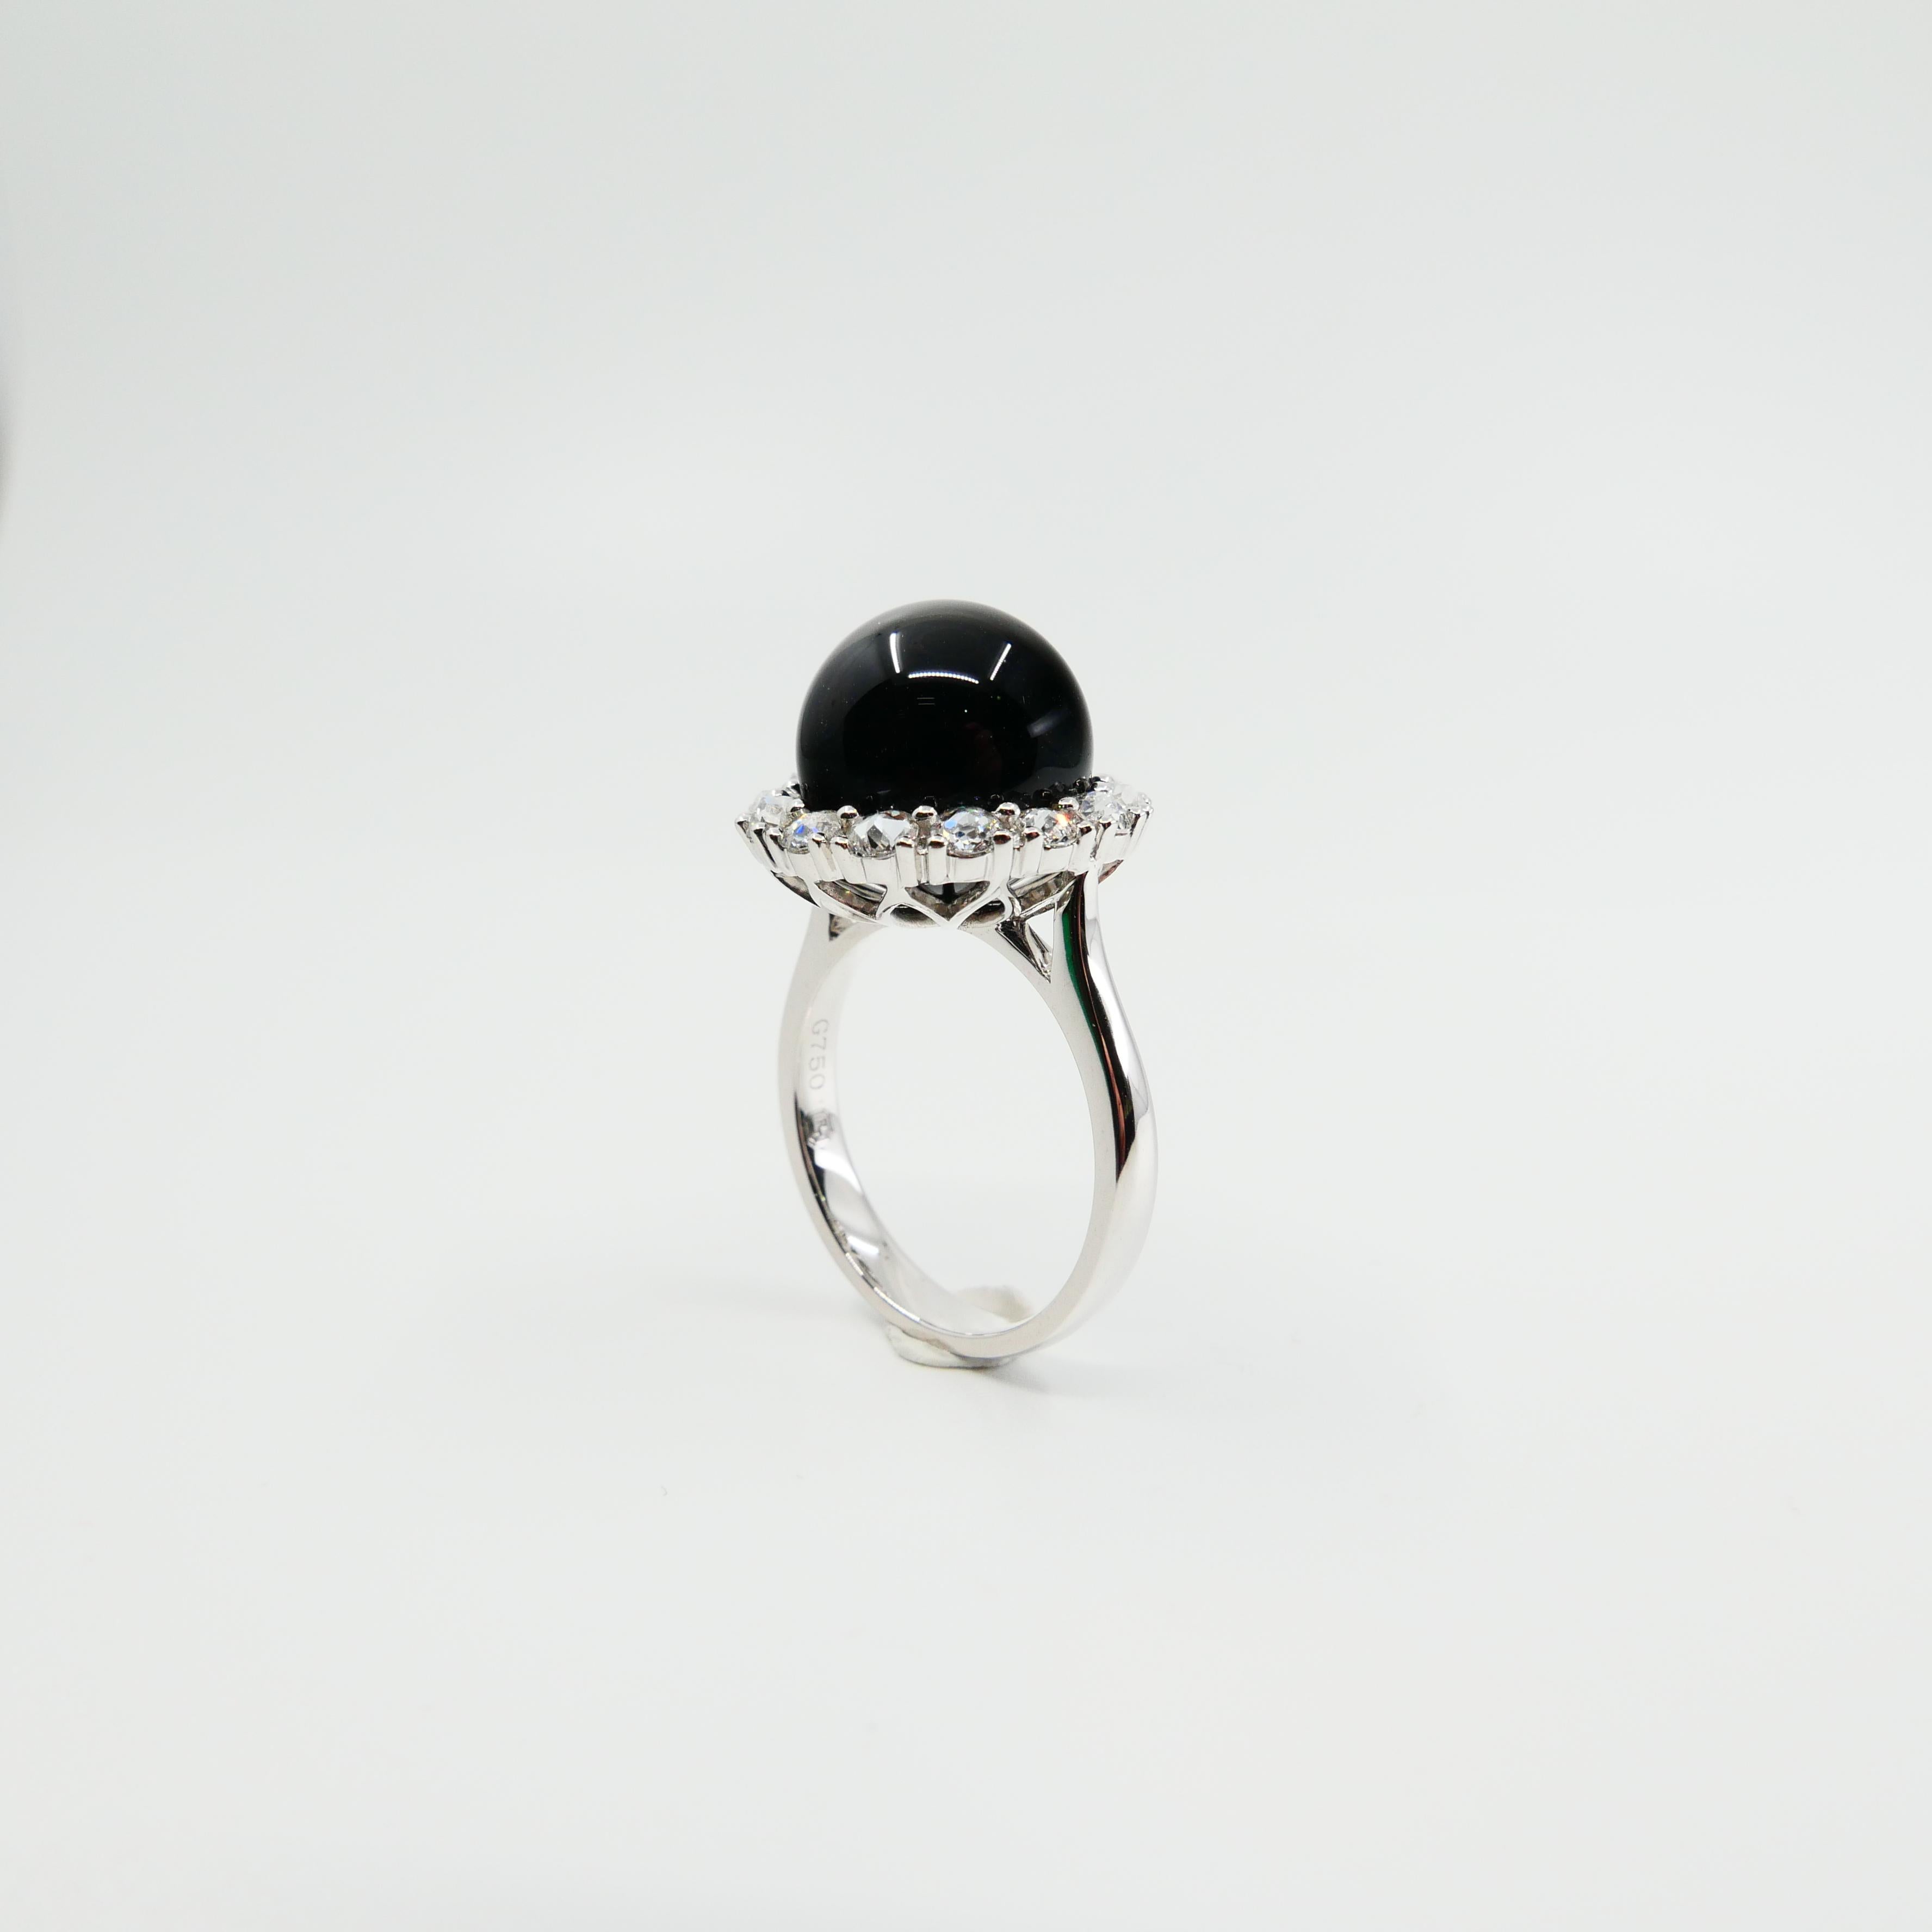 Women's Onyx 12mm And Antique Rose Cut Diamond Cocktail Ring.  For Sale